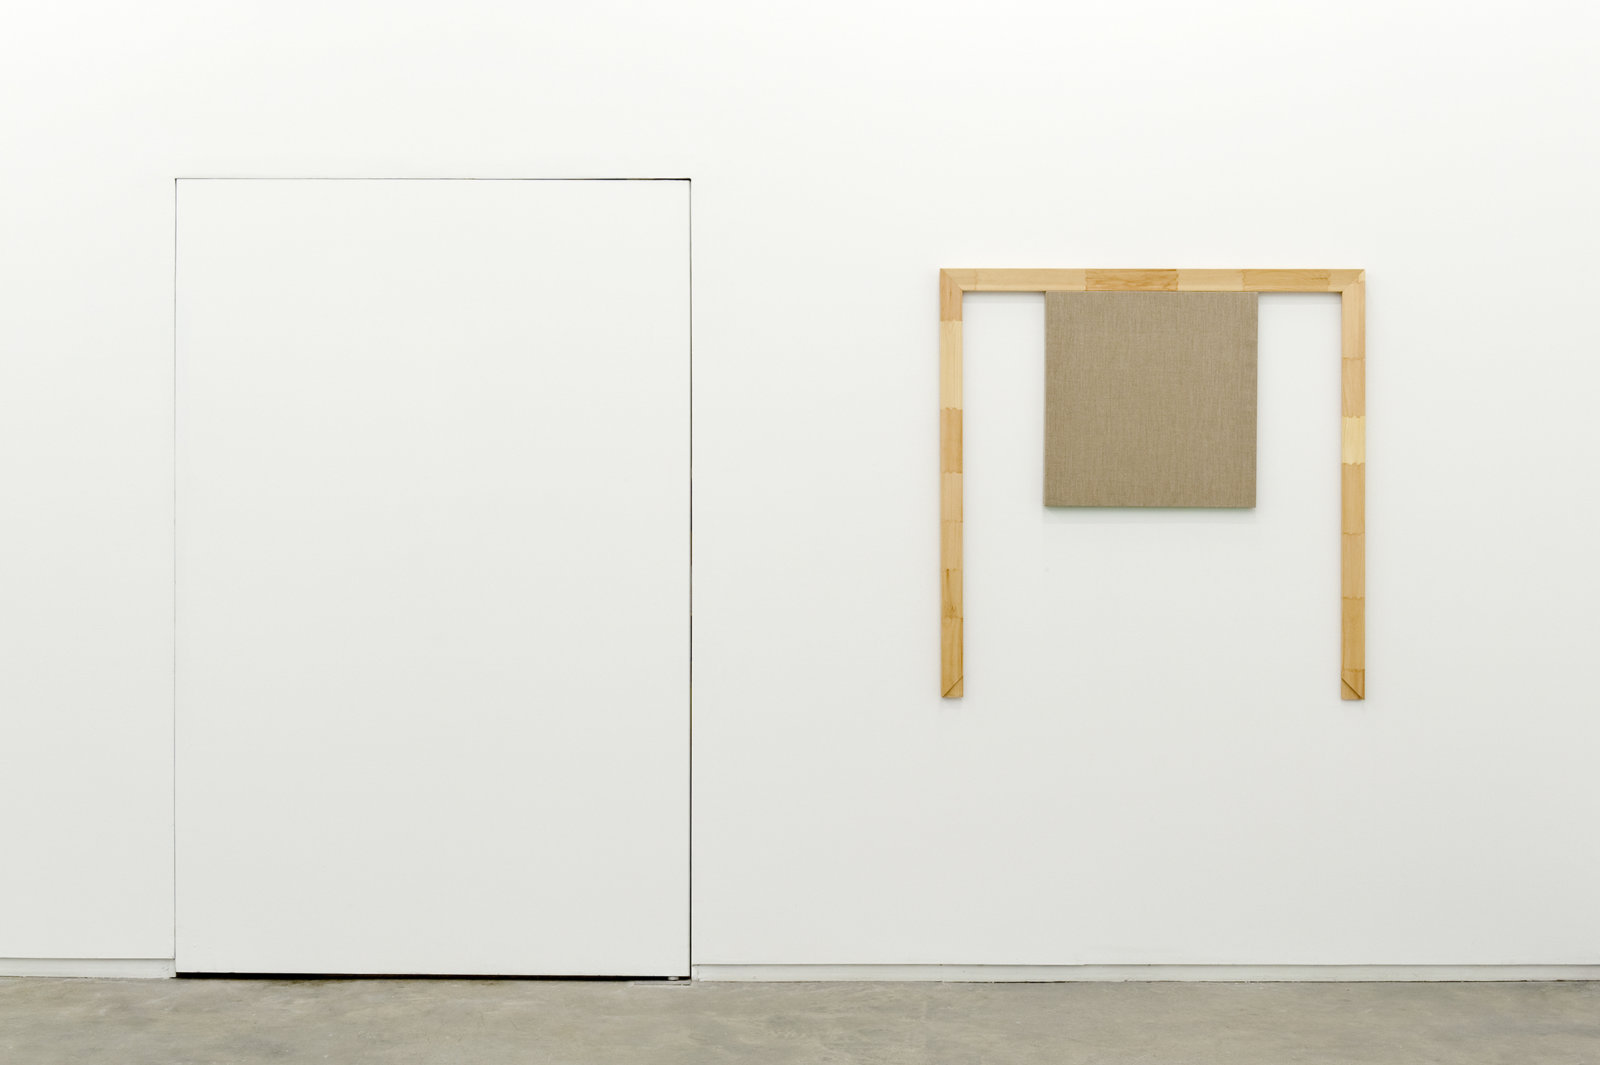 ​Arabella Campbell, We have pictures because we have walls, 2011, linen panel, stretcher bars, 48 x 48 x 1 (122 x 122 x 3 cm) by 